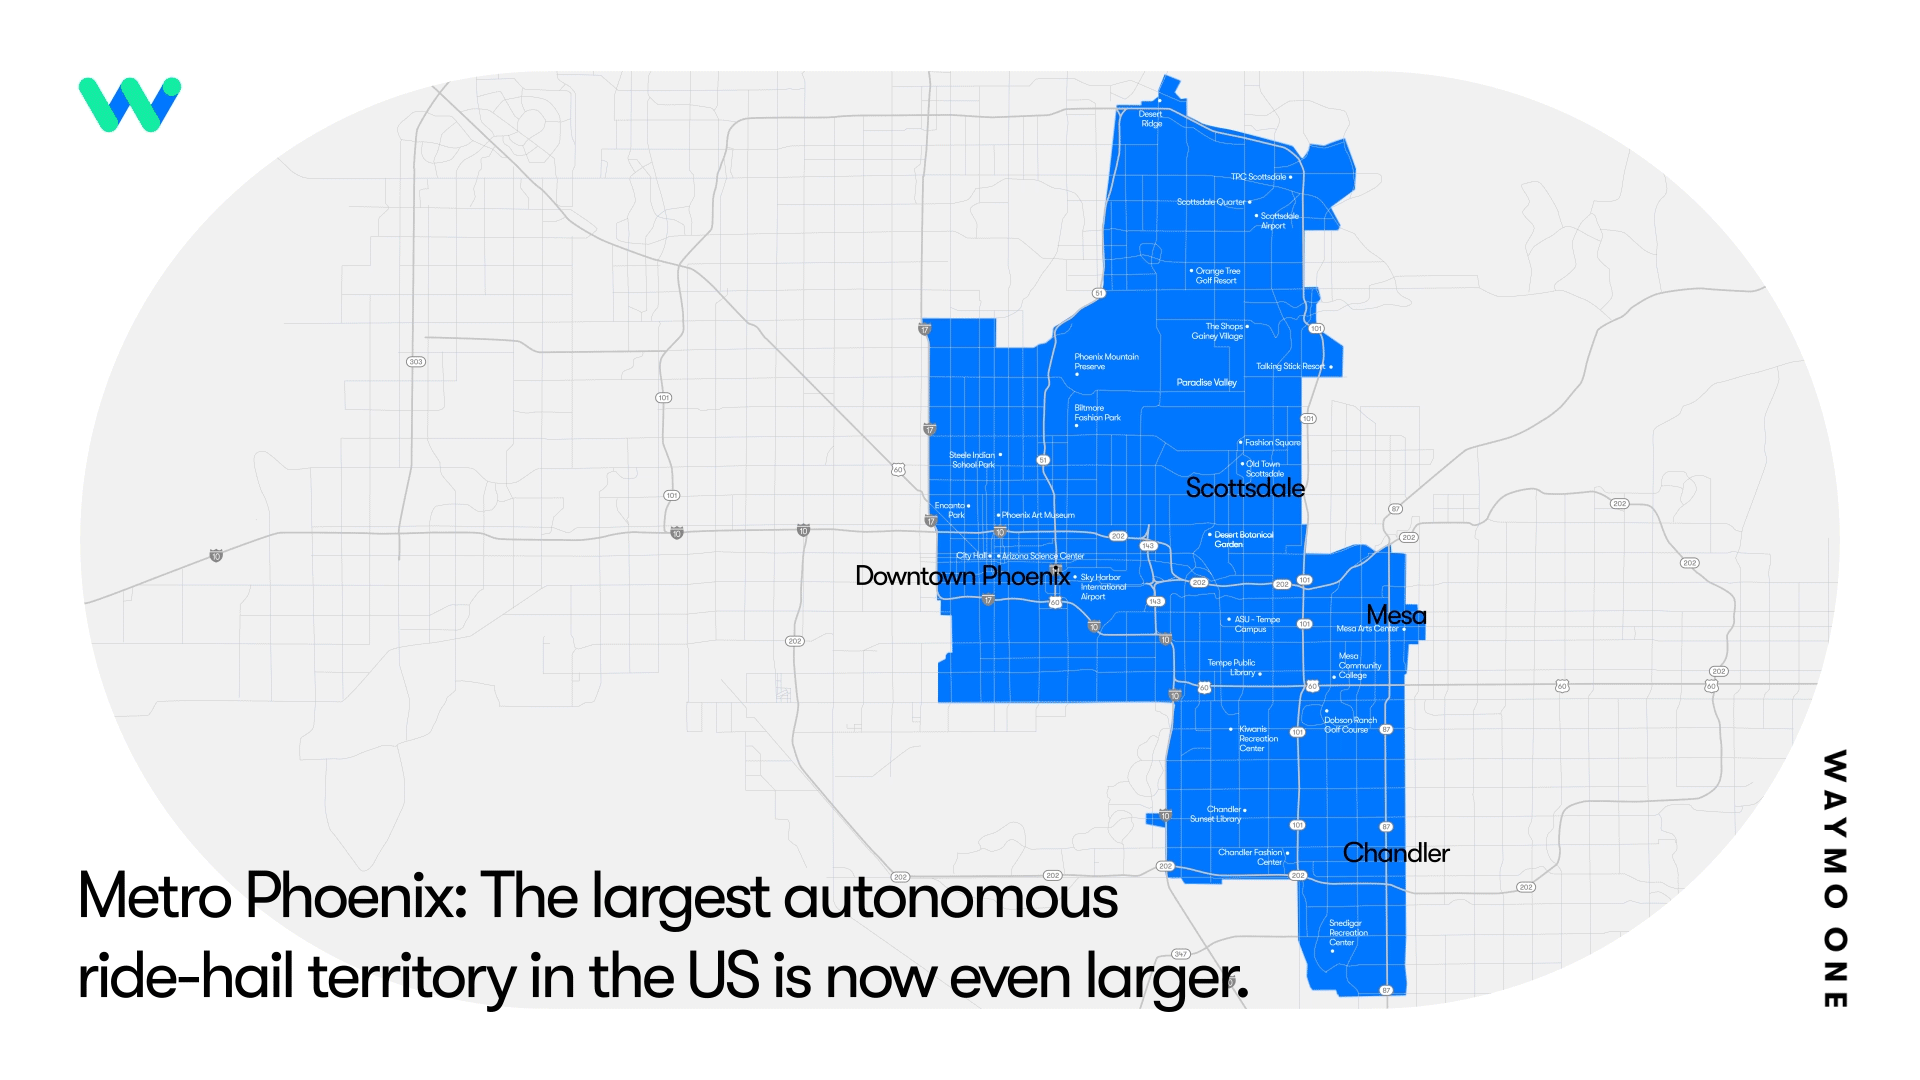 Starting today, Waymo One riders can now access an additional 90 square miles of Metro Phoenix, making the largest autonomous ride-hail territory in t